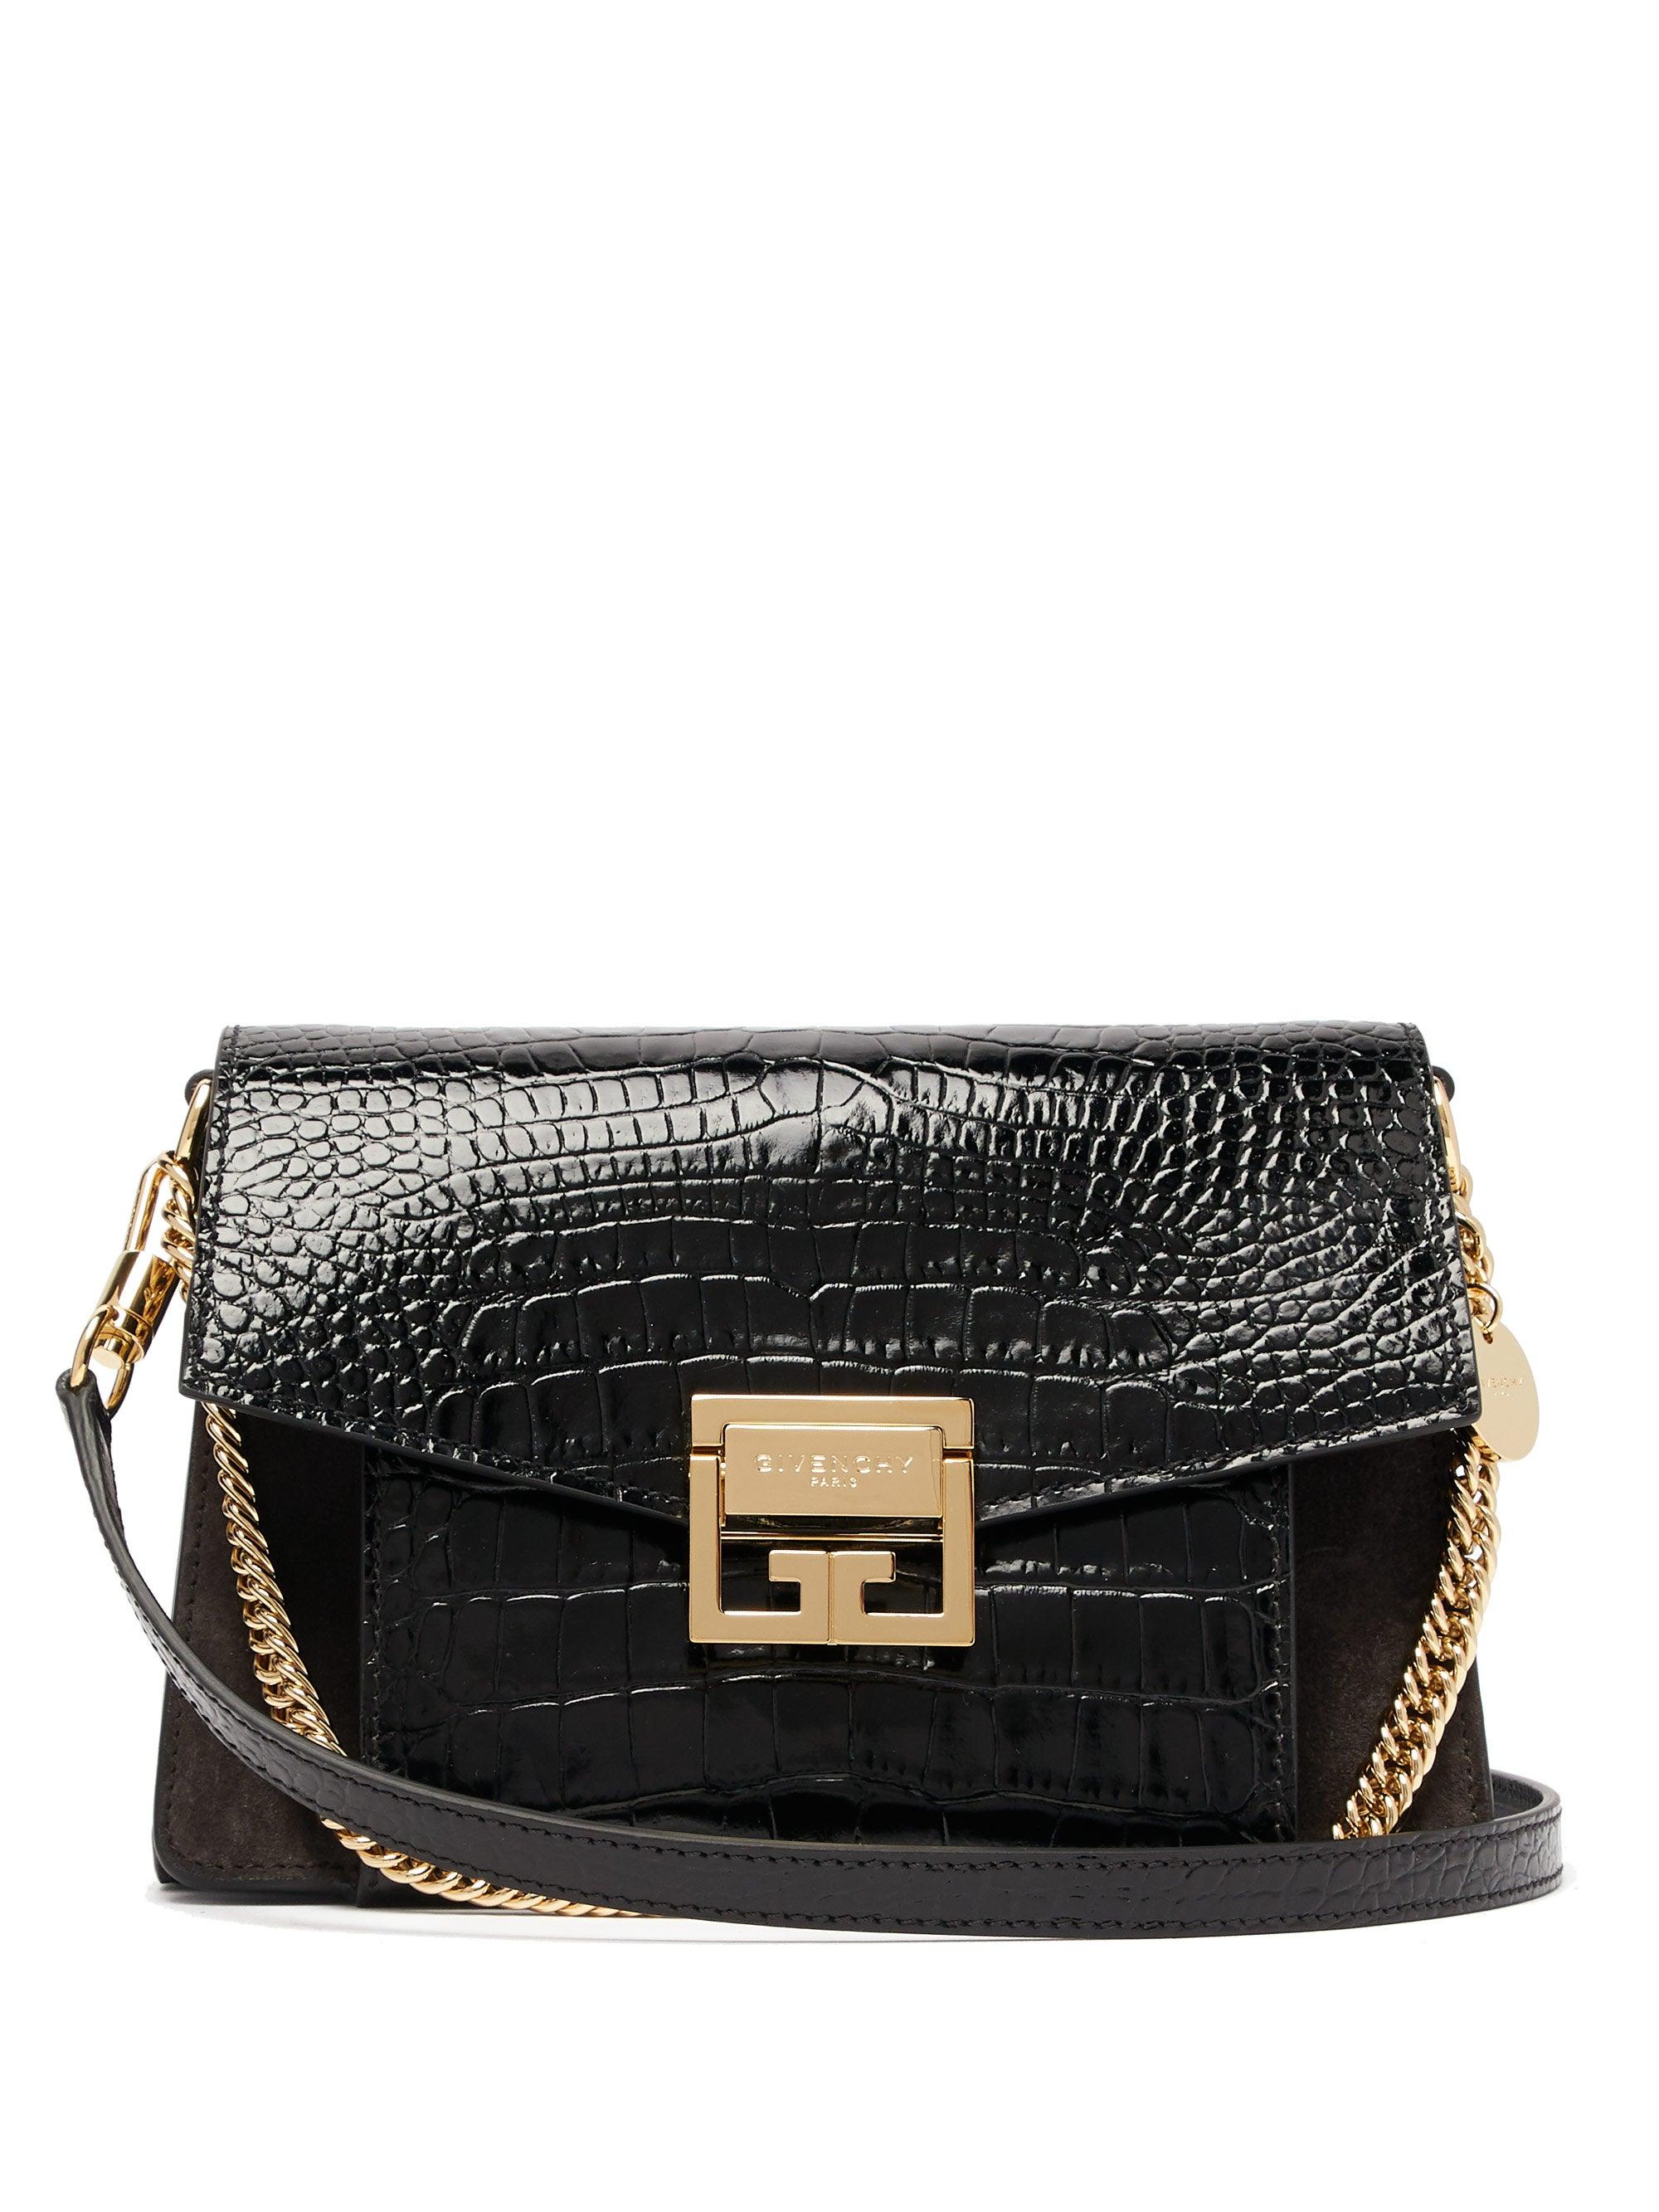 Givenchy Gv3 Small Crocodile-effect Leather Cross-body Bag in